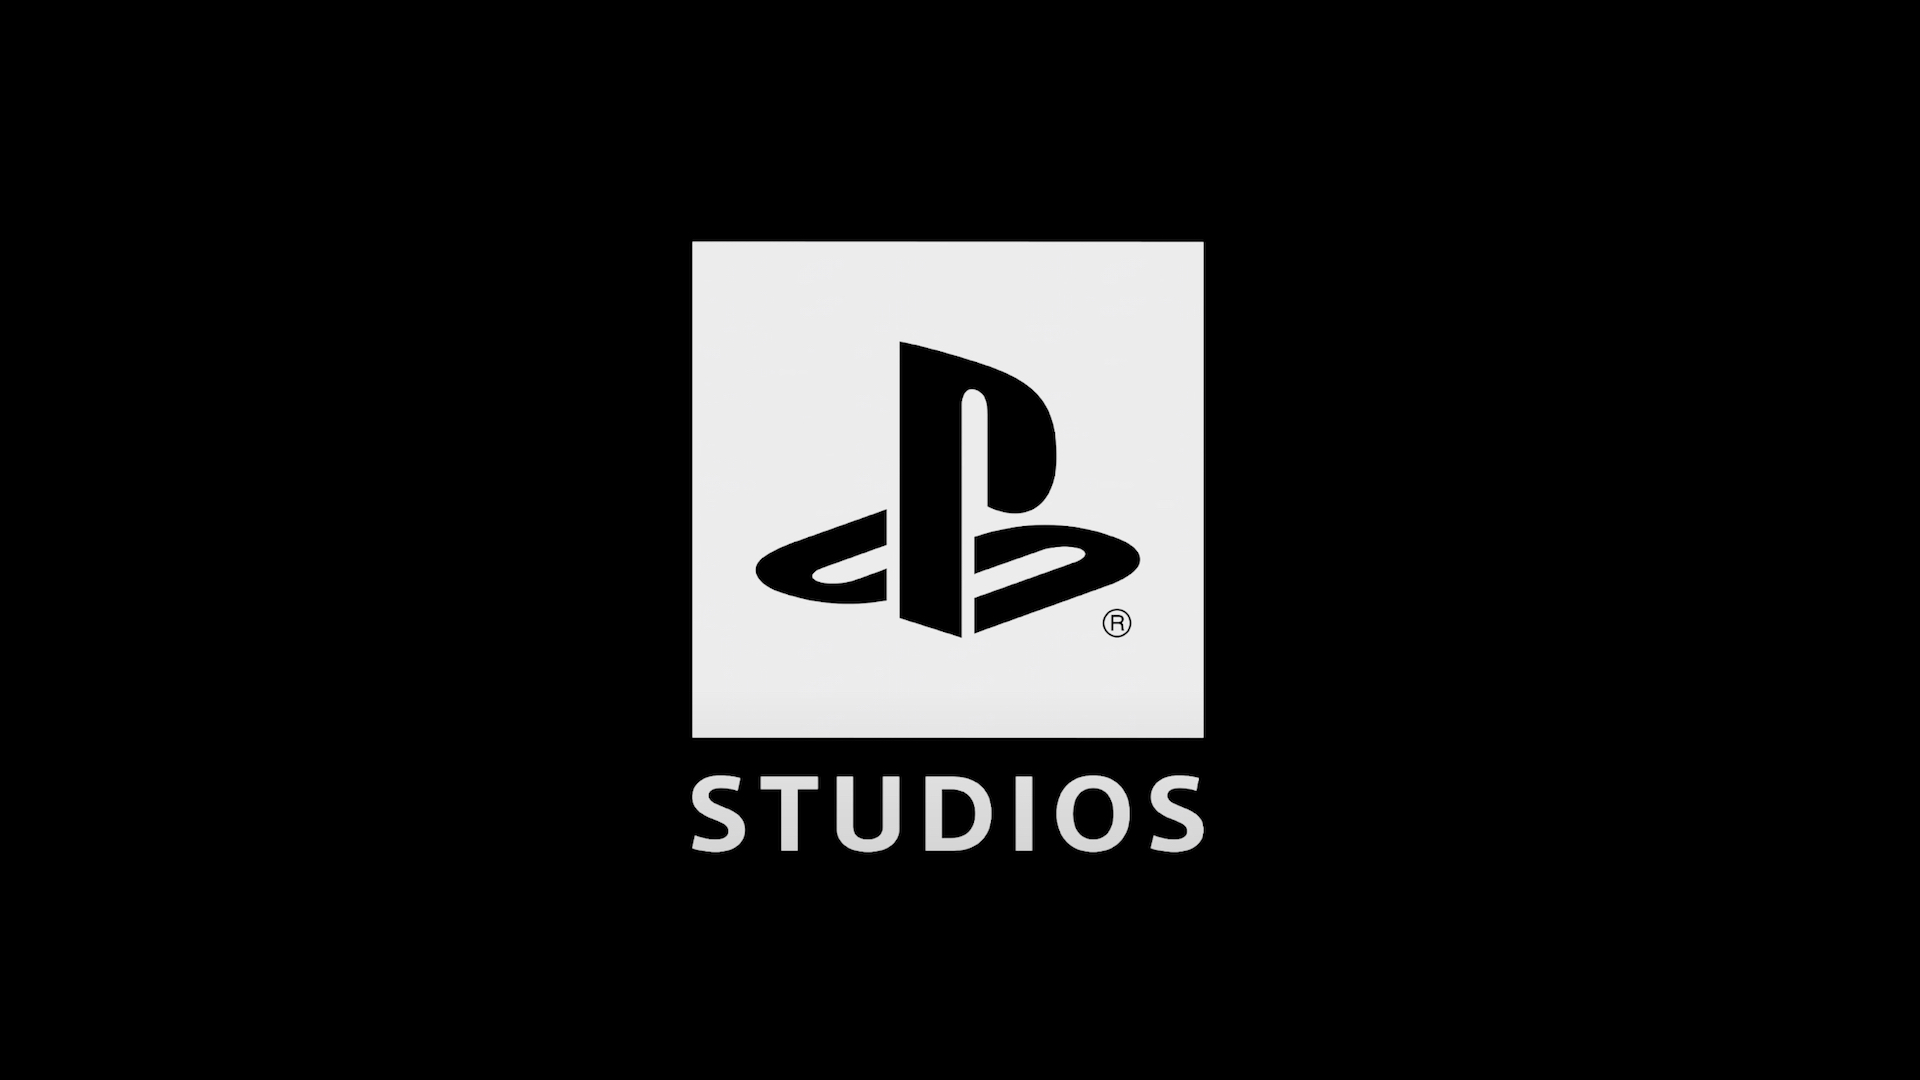 Sony Plans To “invest In Or Acquire” More Studios To Add To First Party Lineup